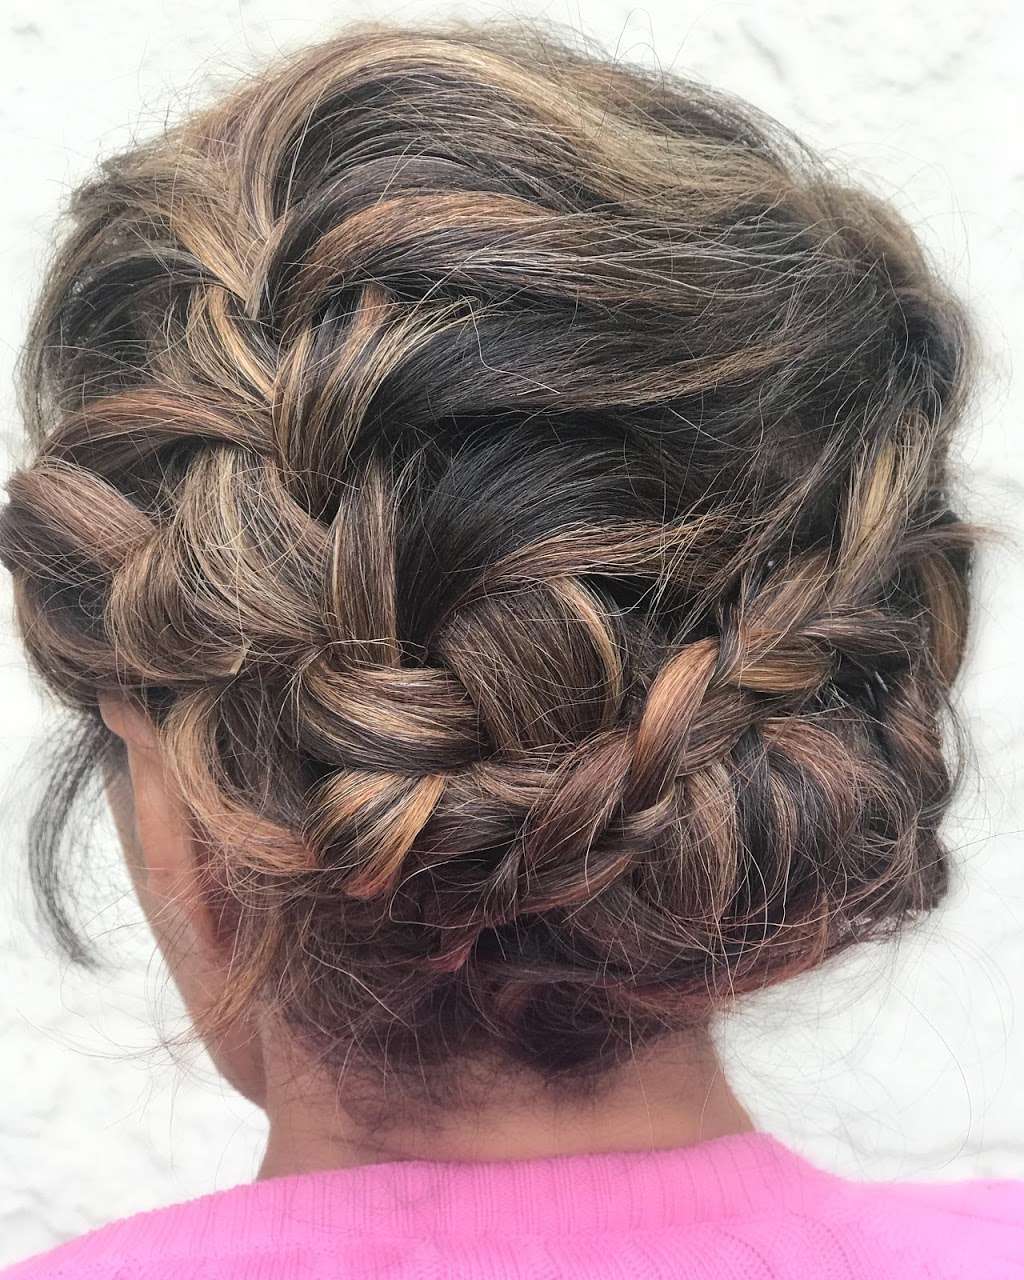 Hair By Erna Hobbs | 10633 S Foothill Blvd, Cupertino, CA 95014, USA | Phone: (408) 831-2881